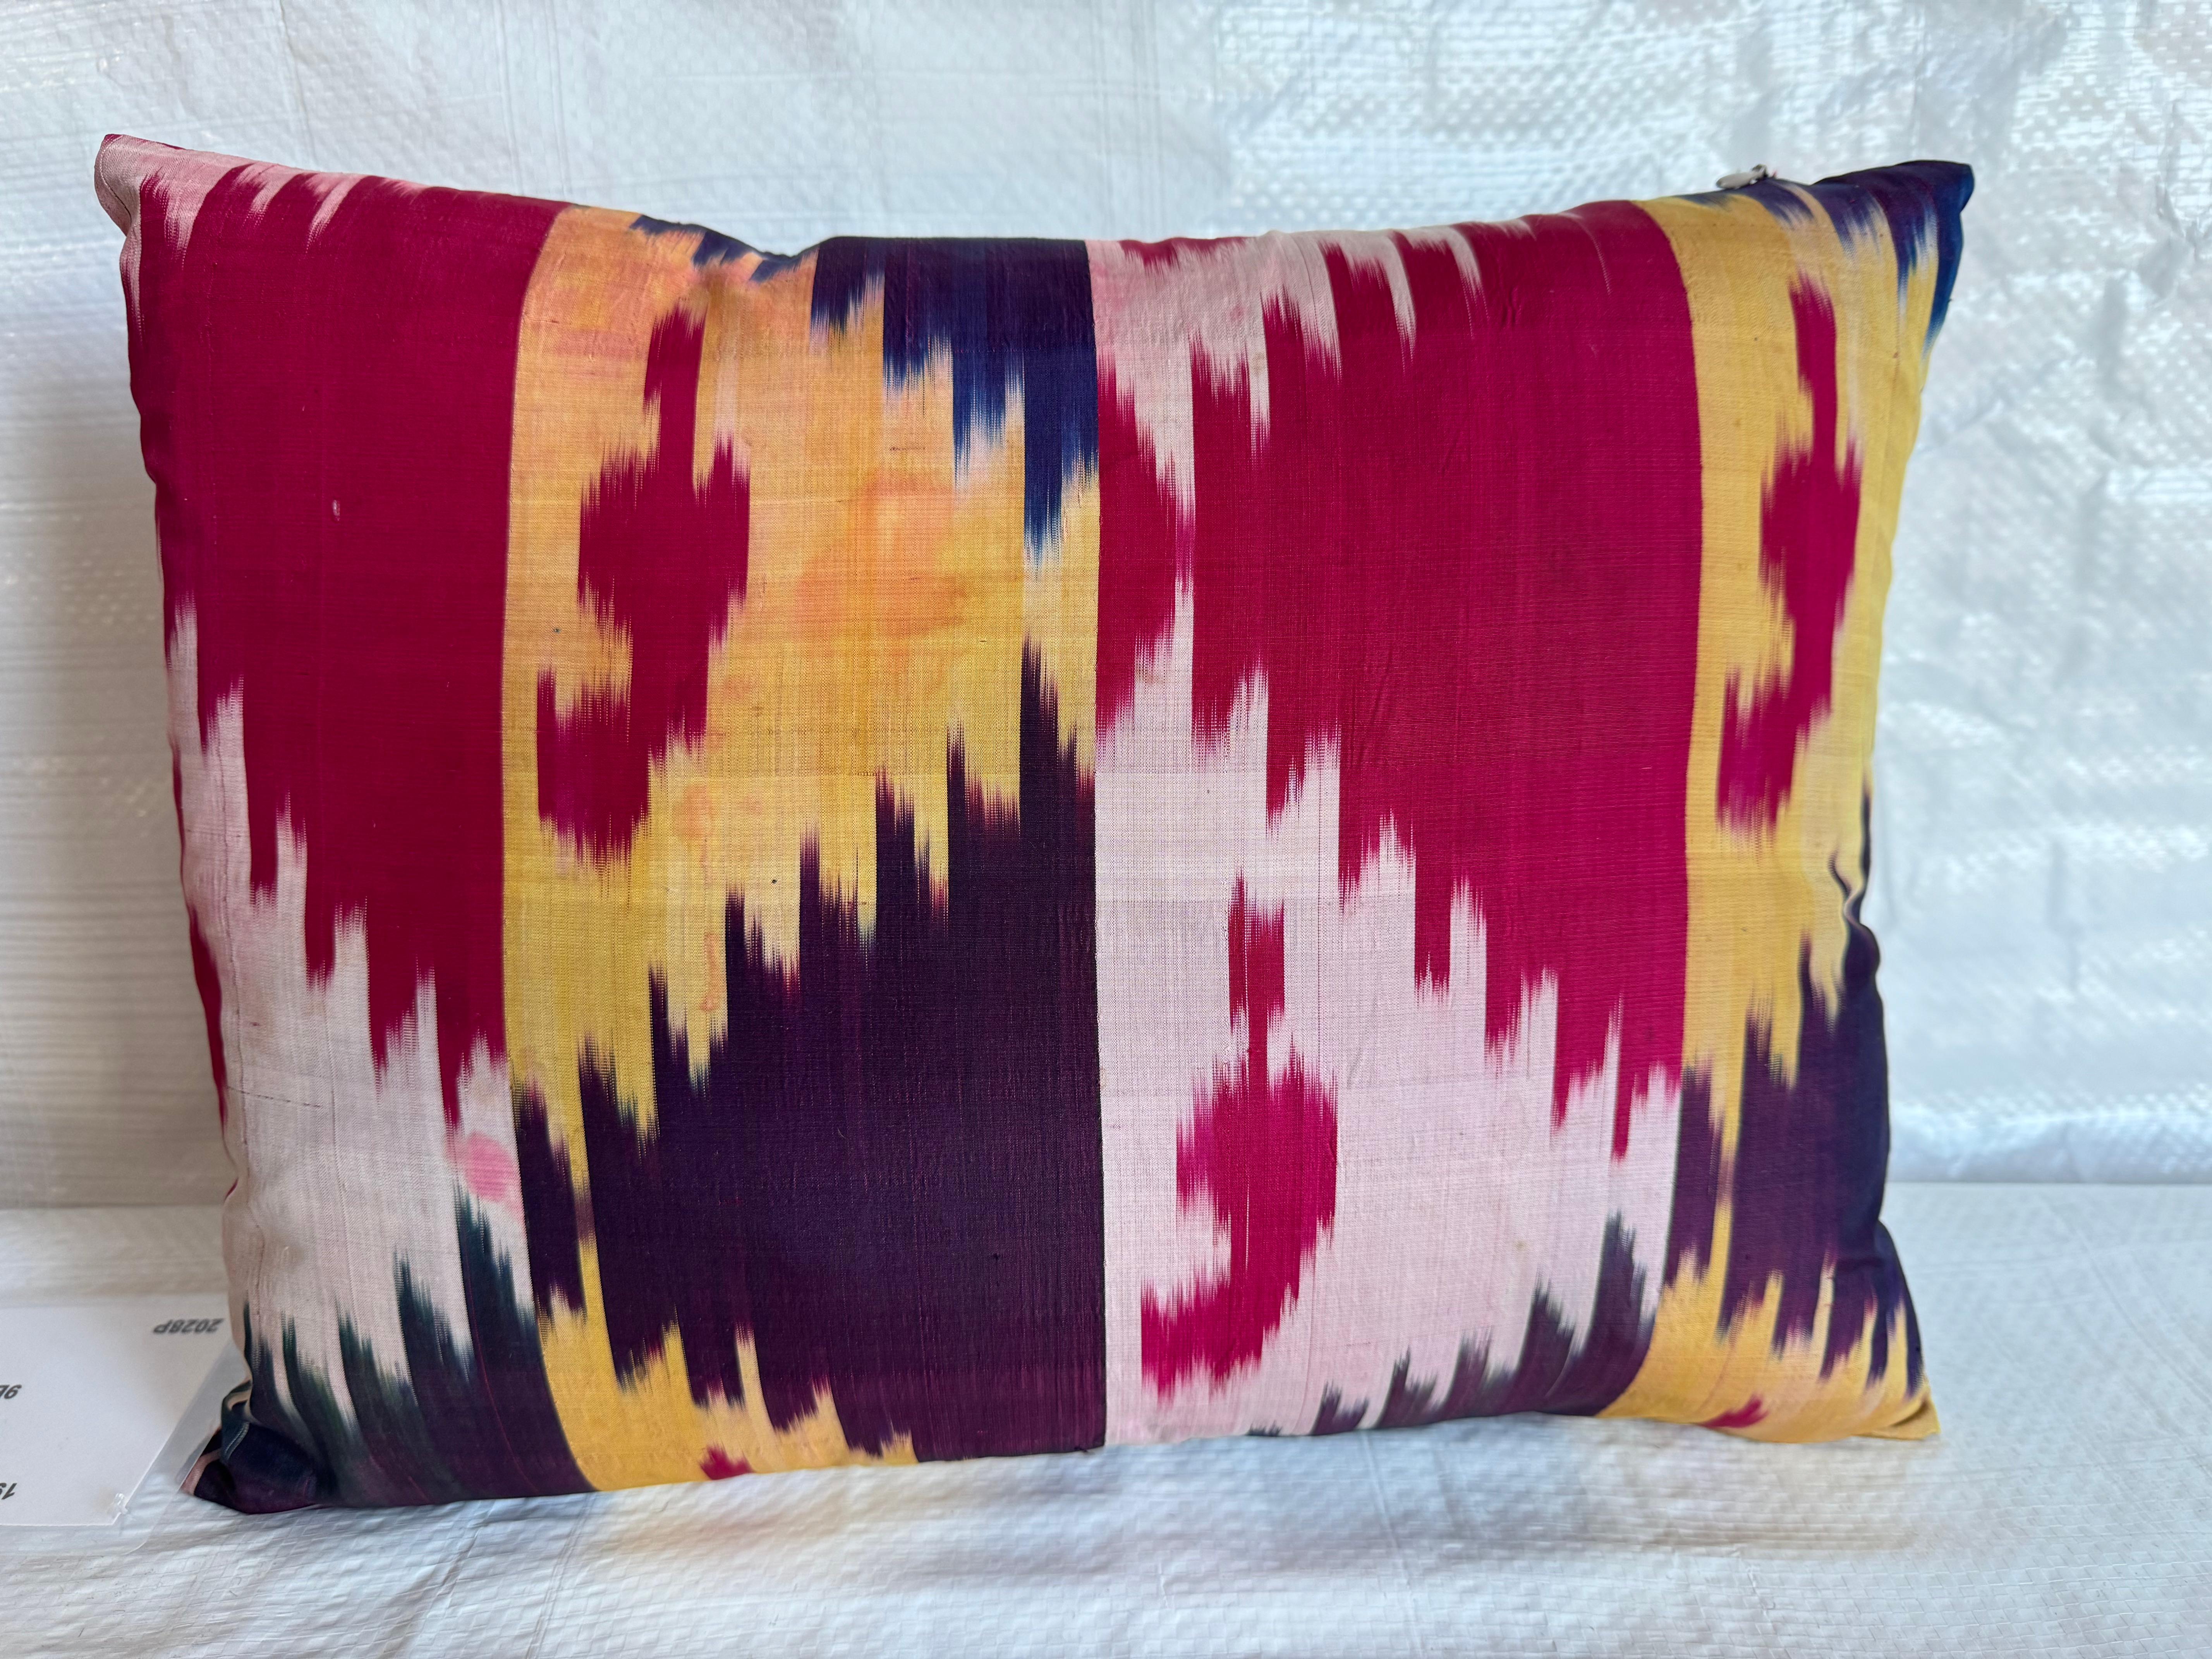 Embrace the vintage allure with the 1990 Ikat Pillow, measuring 15